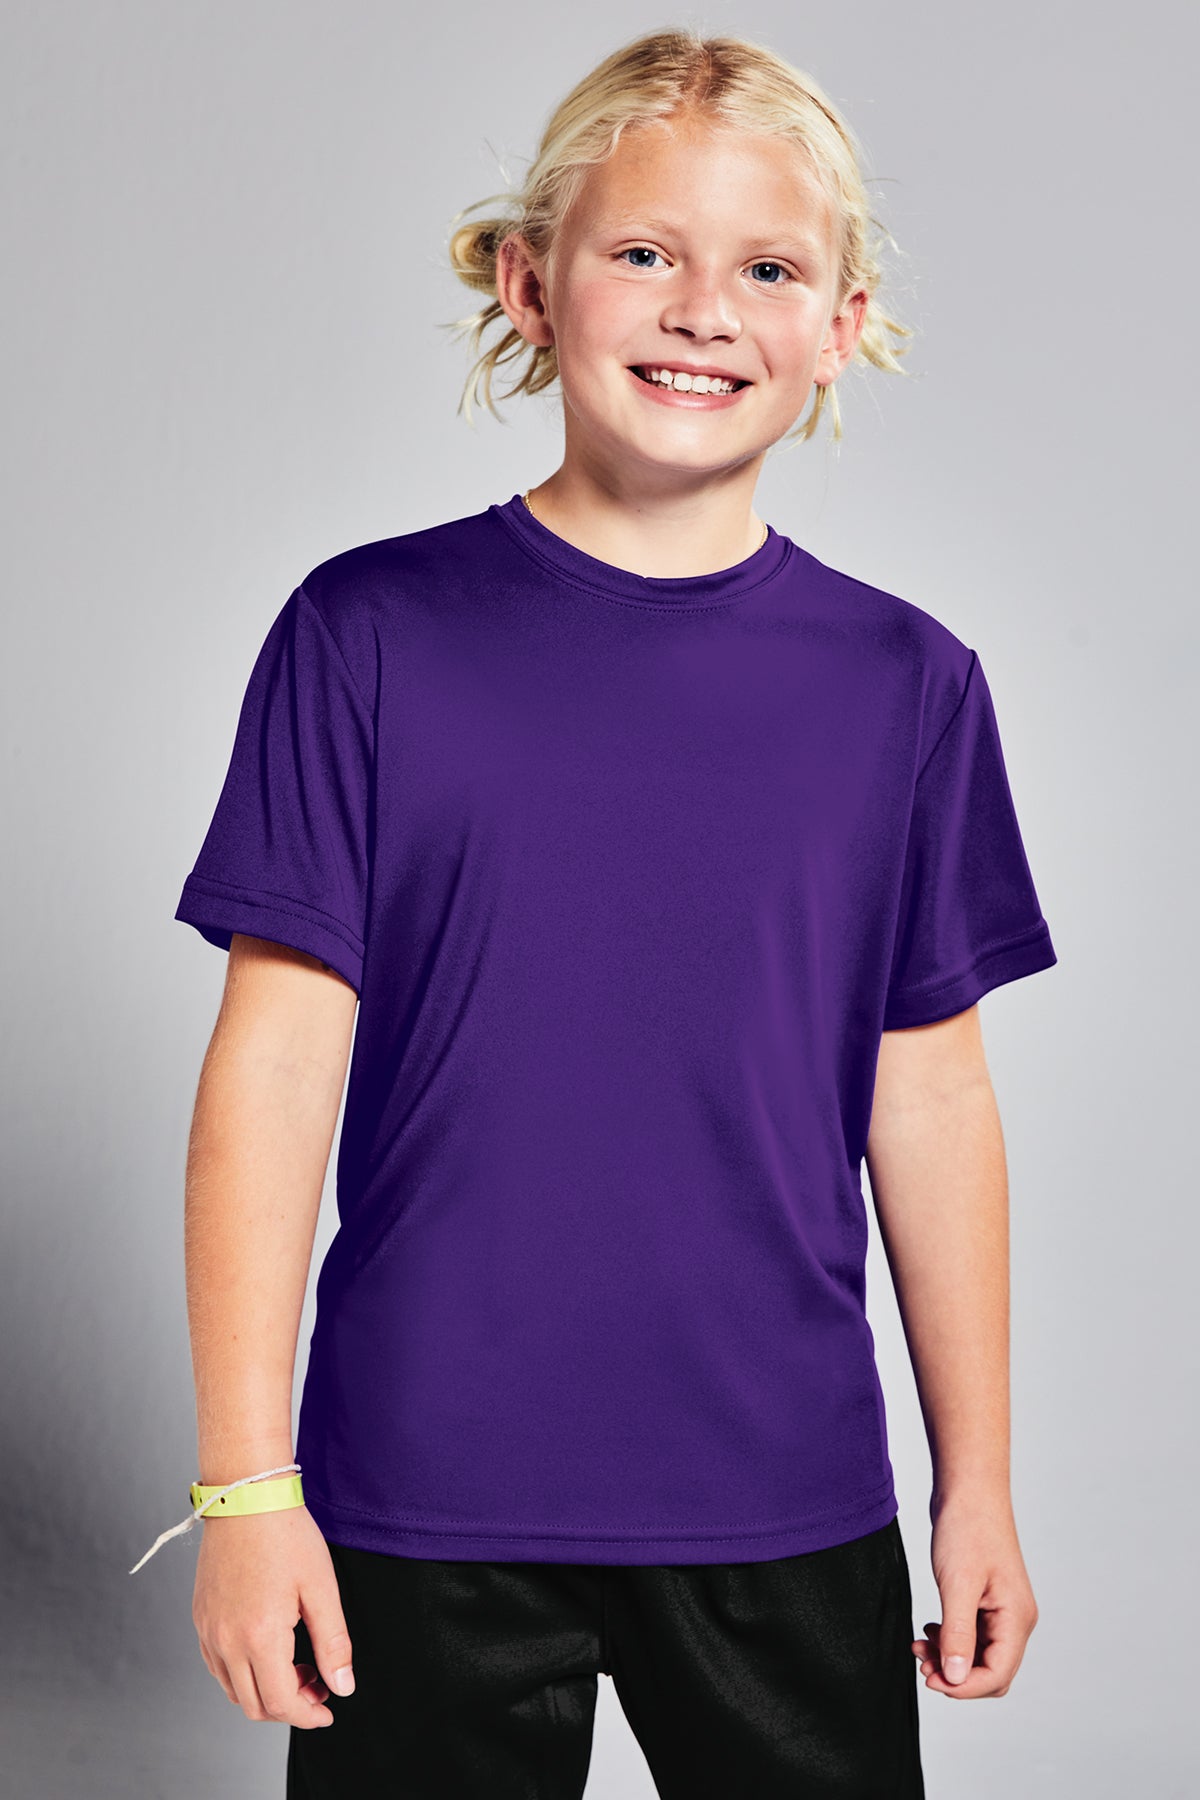 Sport-Tek Youth PosiCharge Competitor Tee. YST350 - BT Imprintables Shirts